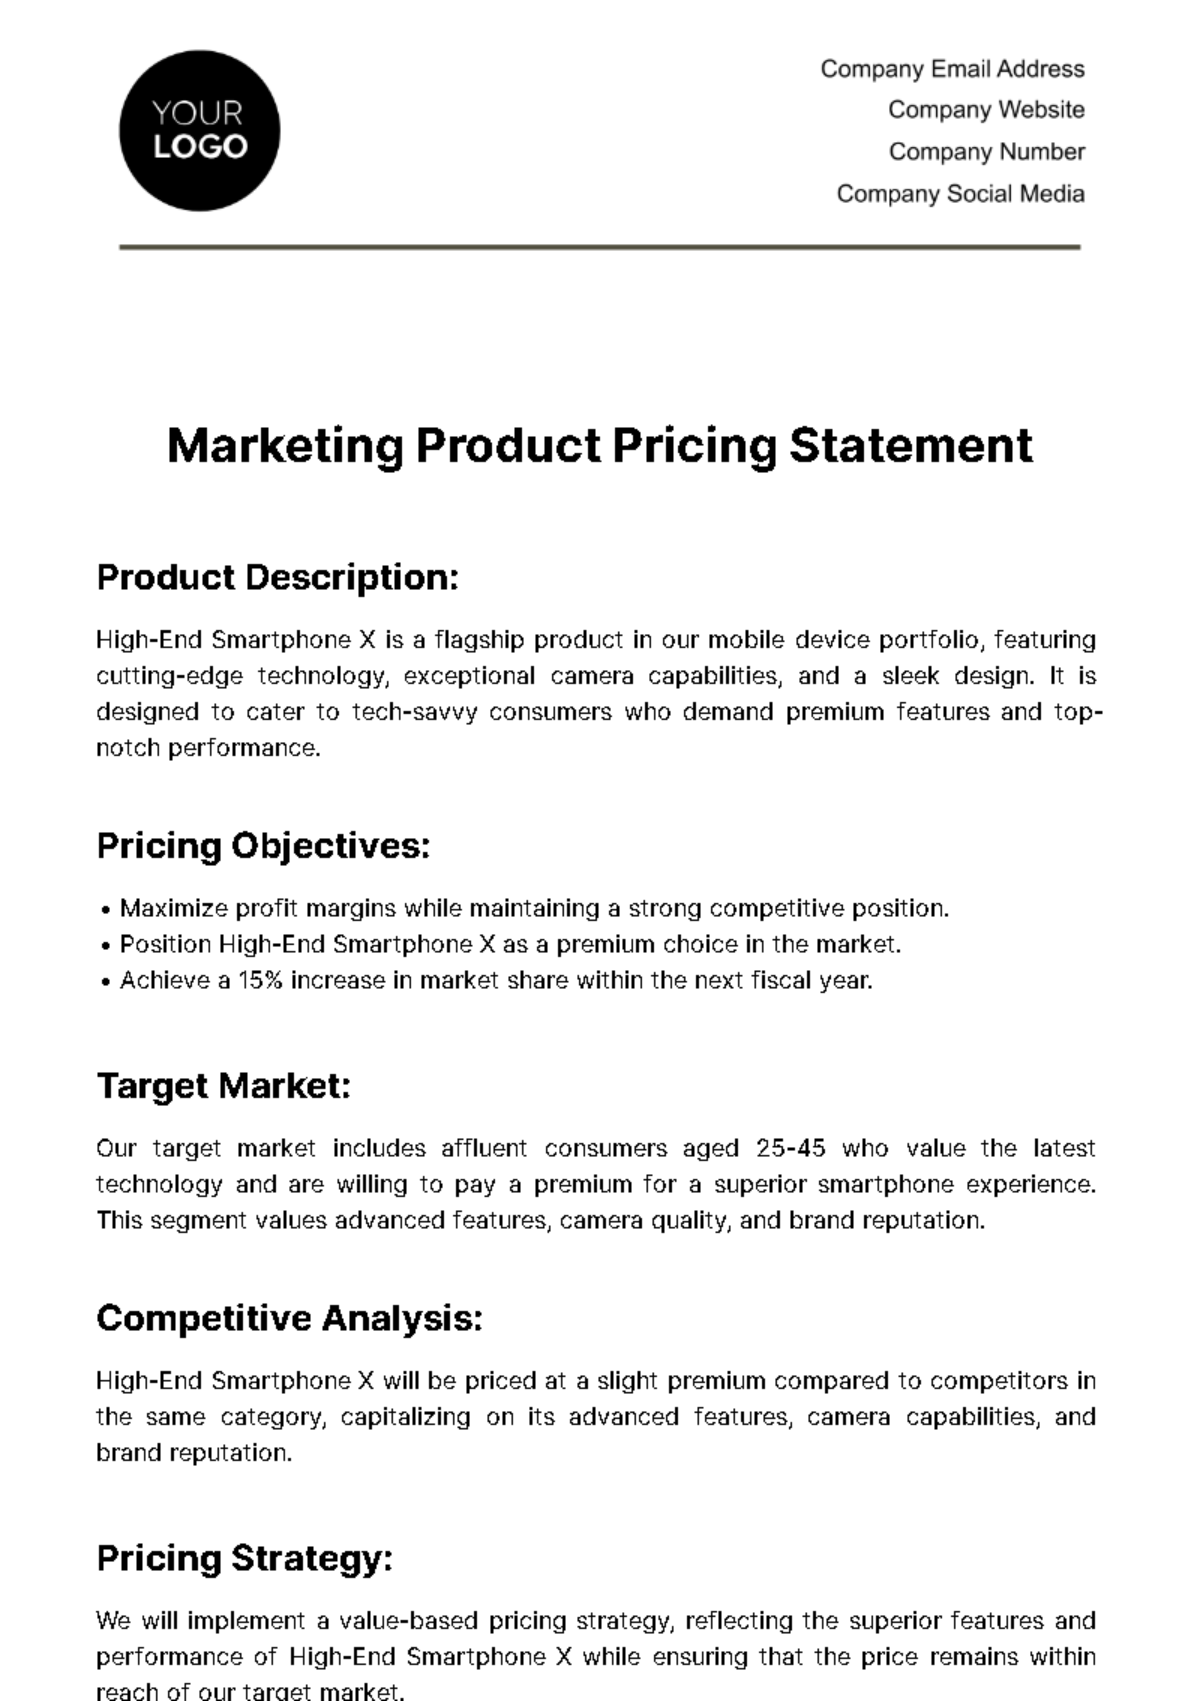 Free Marketing Product Pricing Statement Template